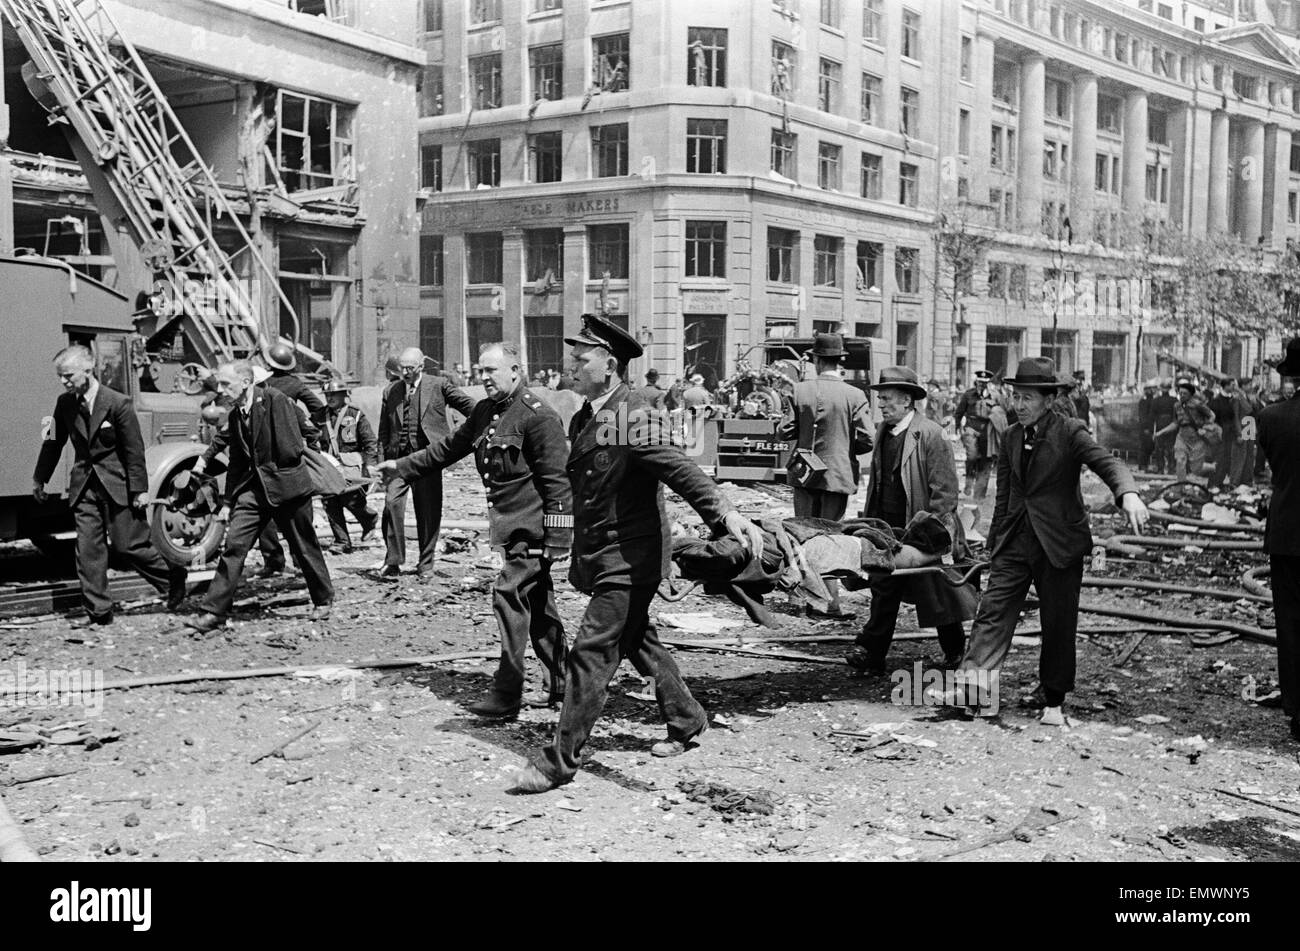 Rescue of casualties by N.F.S and C.D on Buxton and Underwood St, E1, after a hit by a V1 Flying bomb. 1st August 1944. Stock Photo